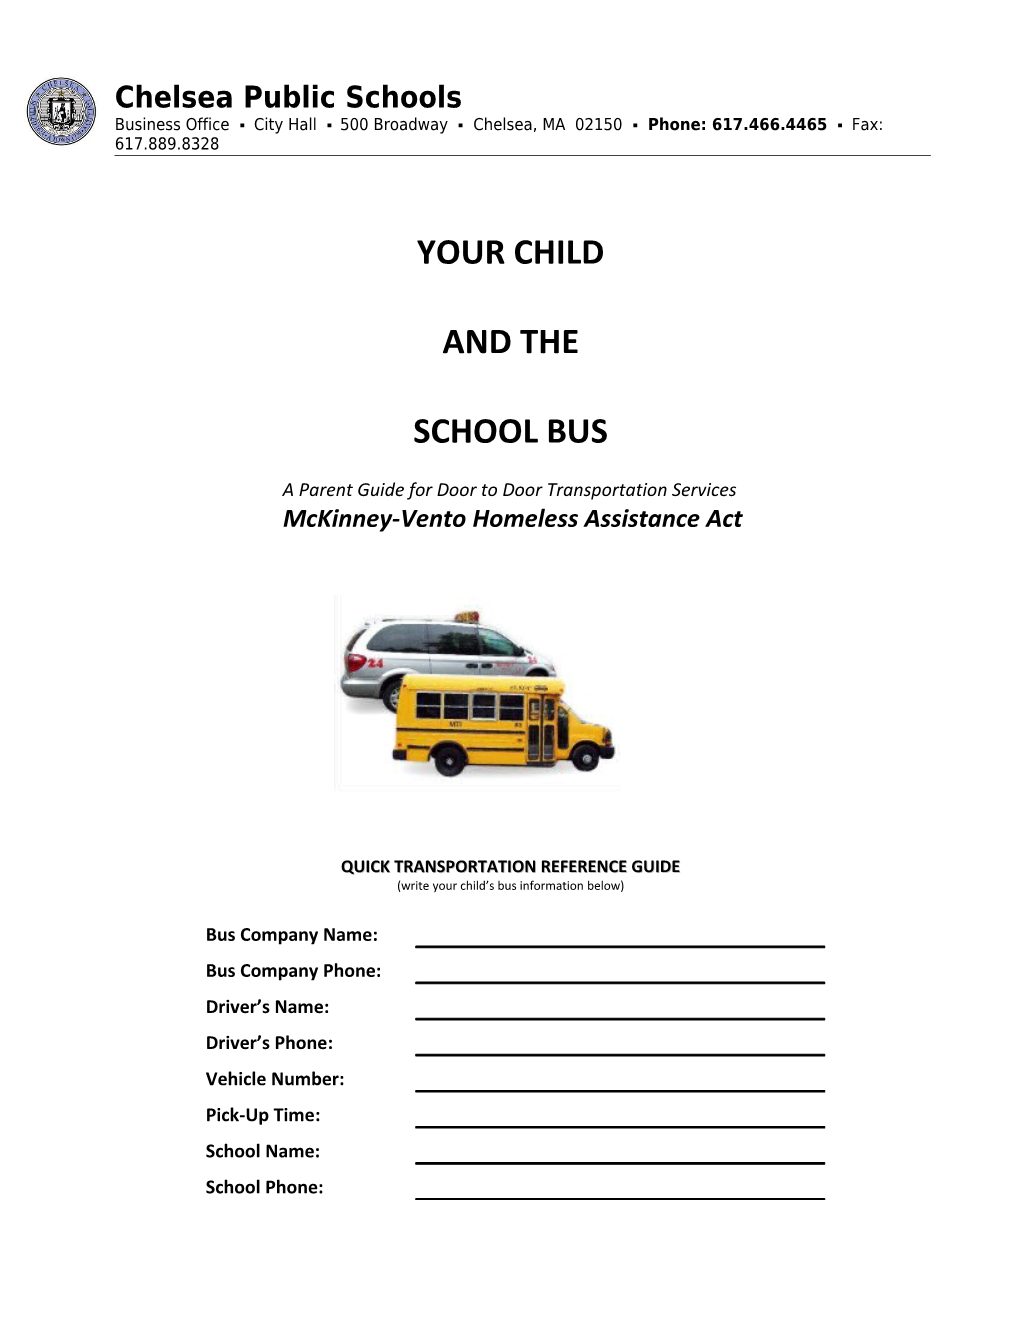 A Parent Guide for Door to Door Transportation Services